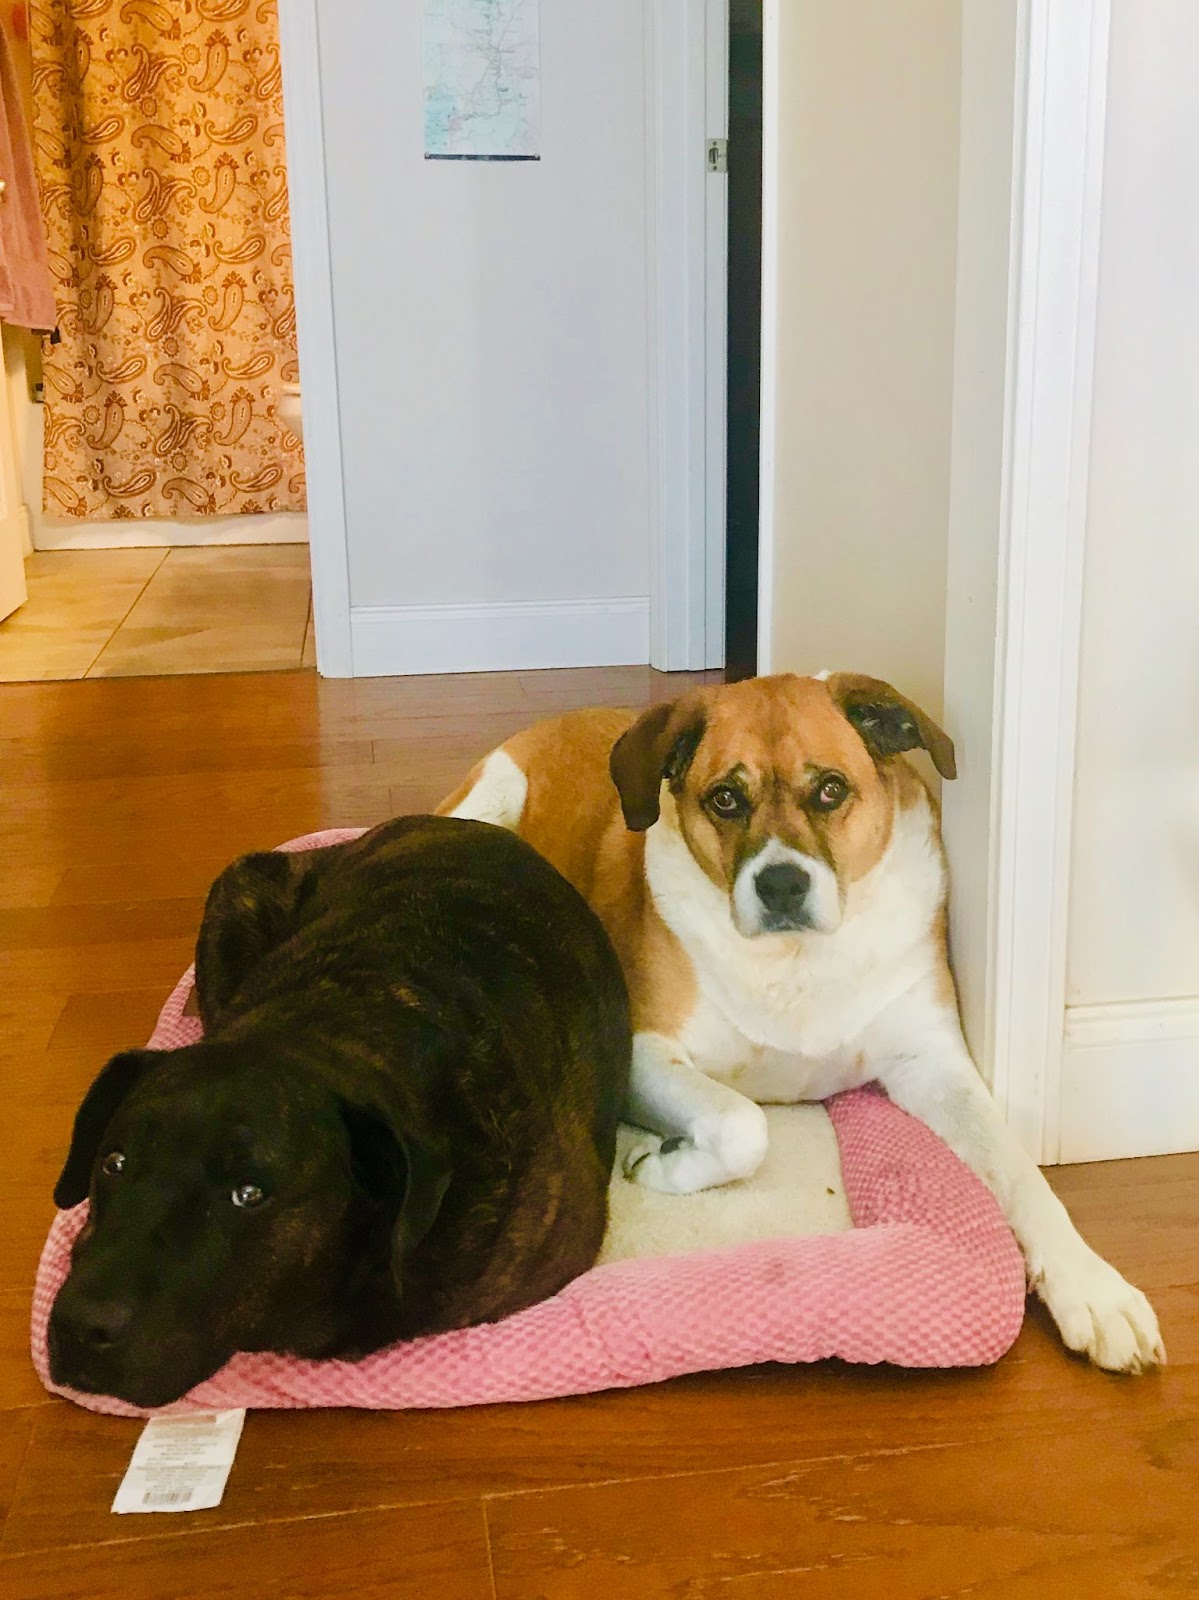 Two dogs, one black, one white and tan, snuggled up on a dog bed. 